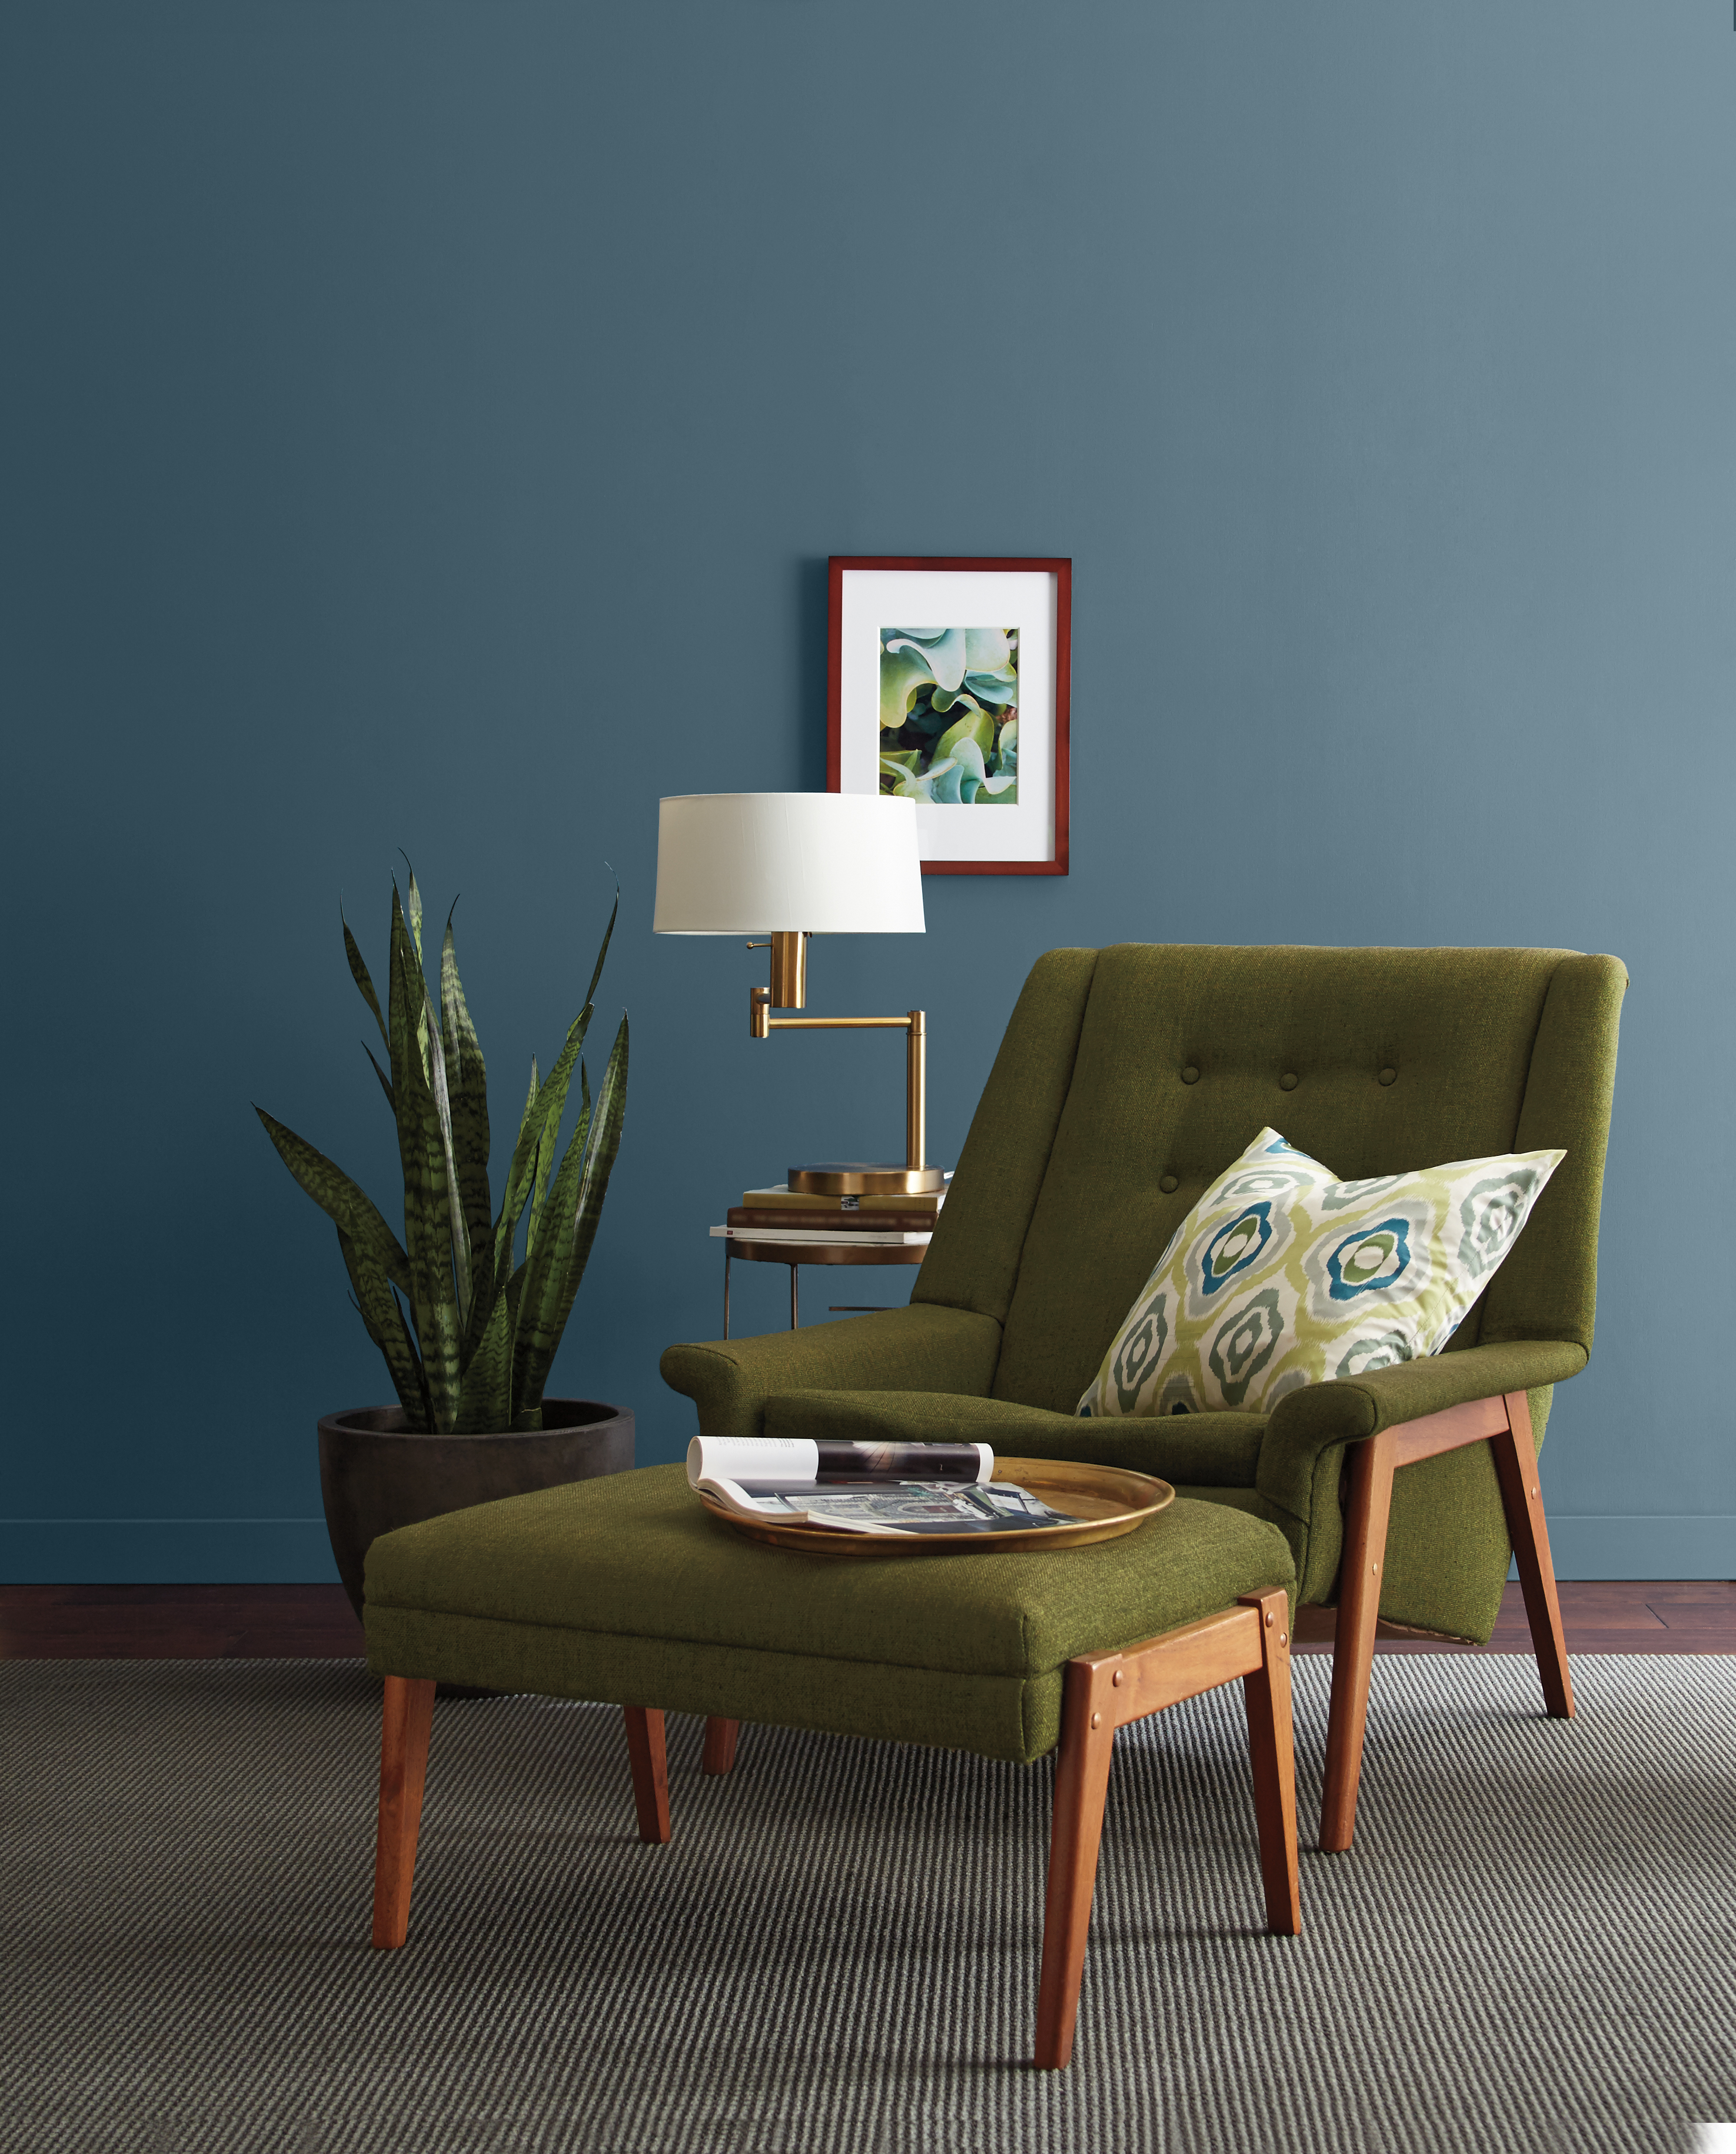 Wall painted in a dark blue colour, styled with a retro olive-green chair and décor pieces